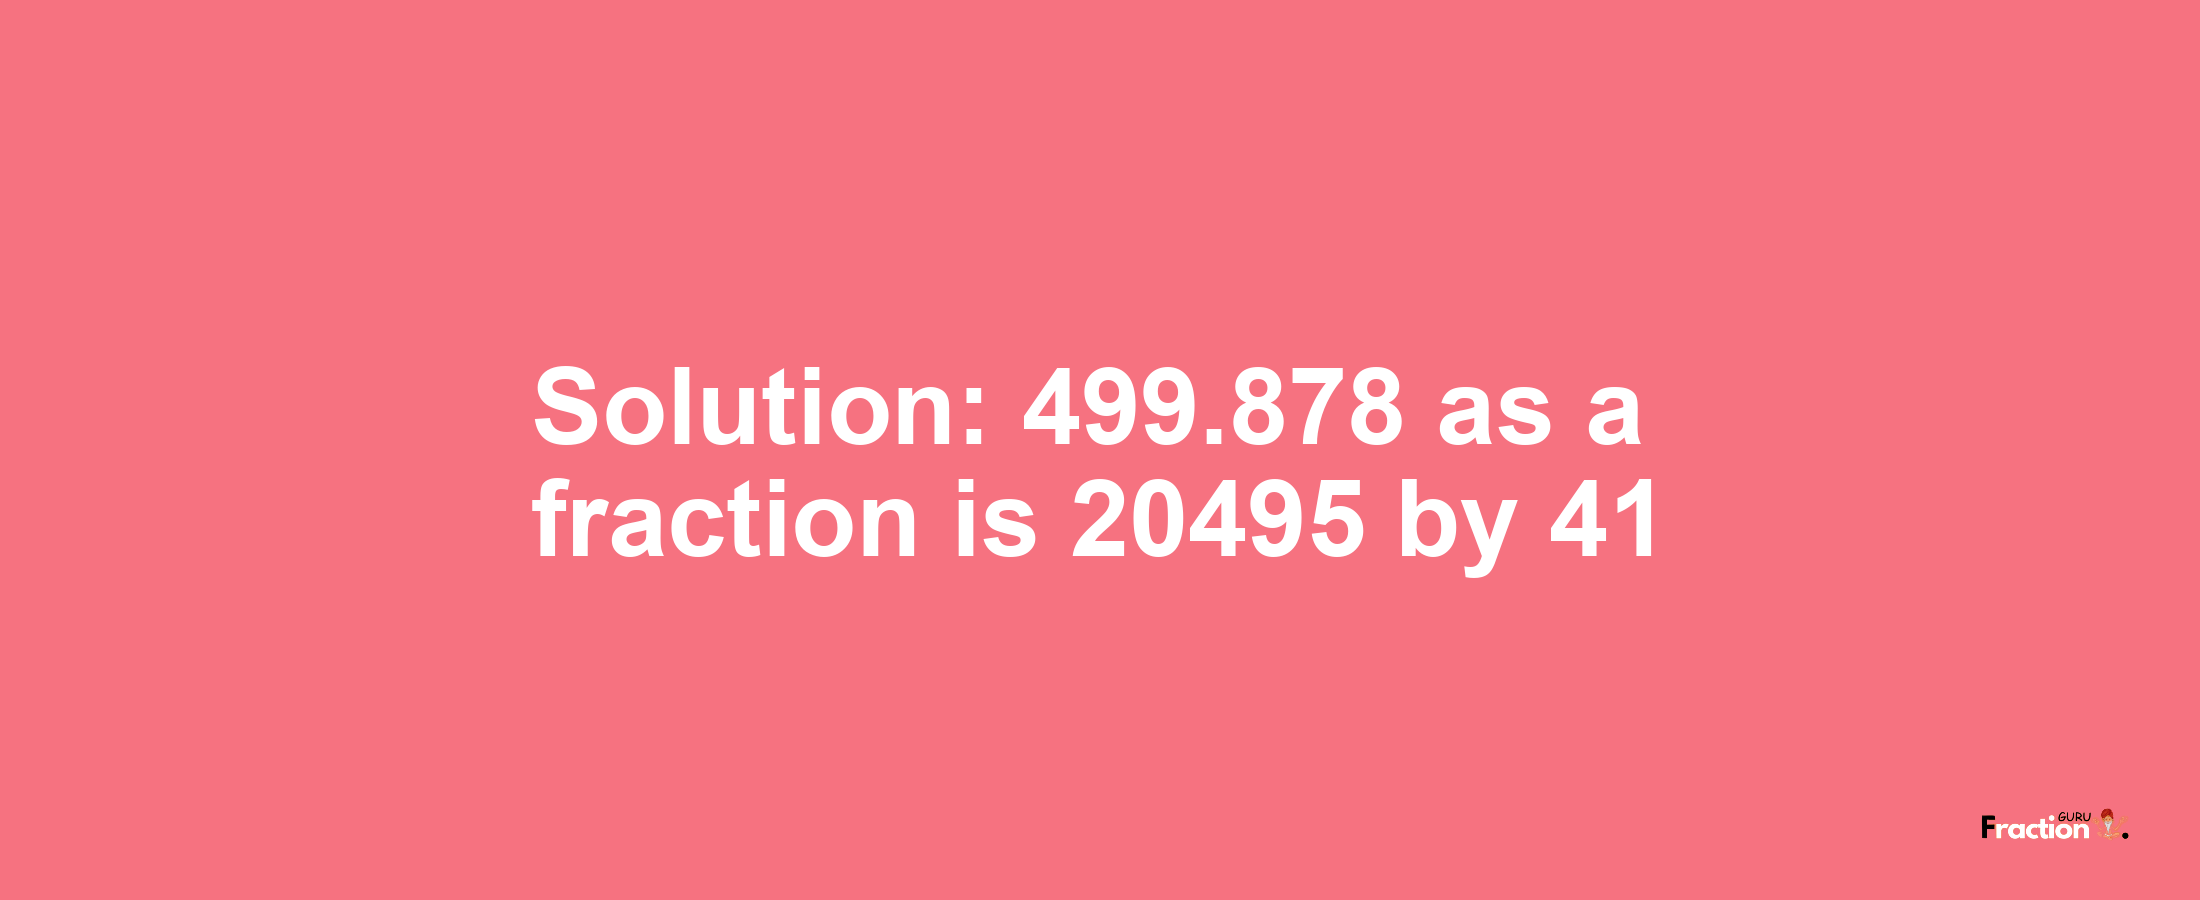 Solution:499.878 as a fraction is 20495/41